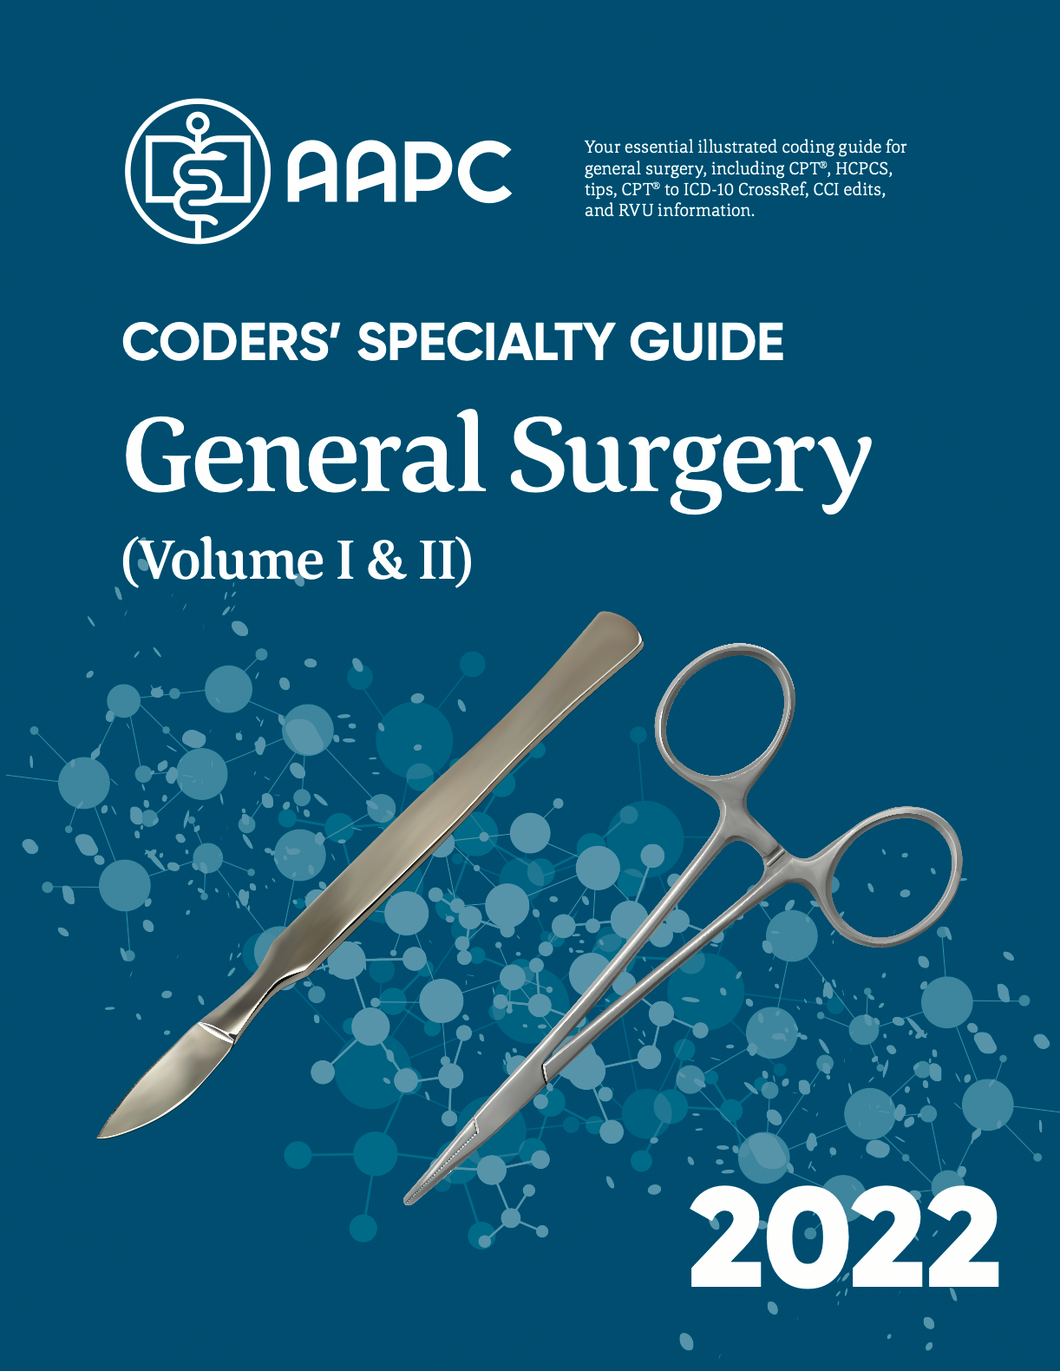 Coders' Specialty Guide 2022: General Surgery (Volume I & II)